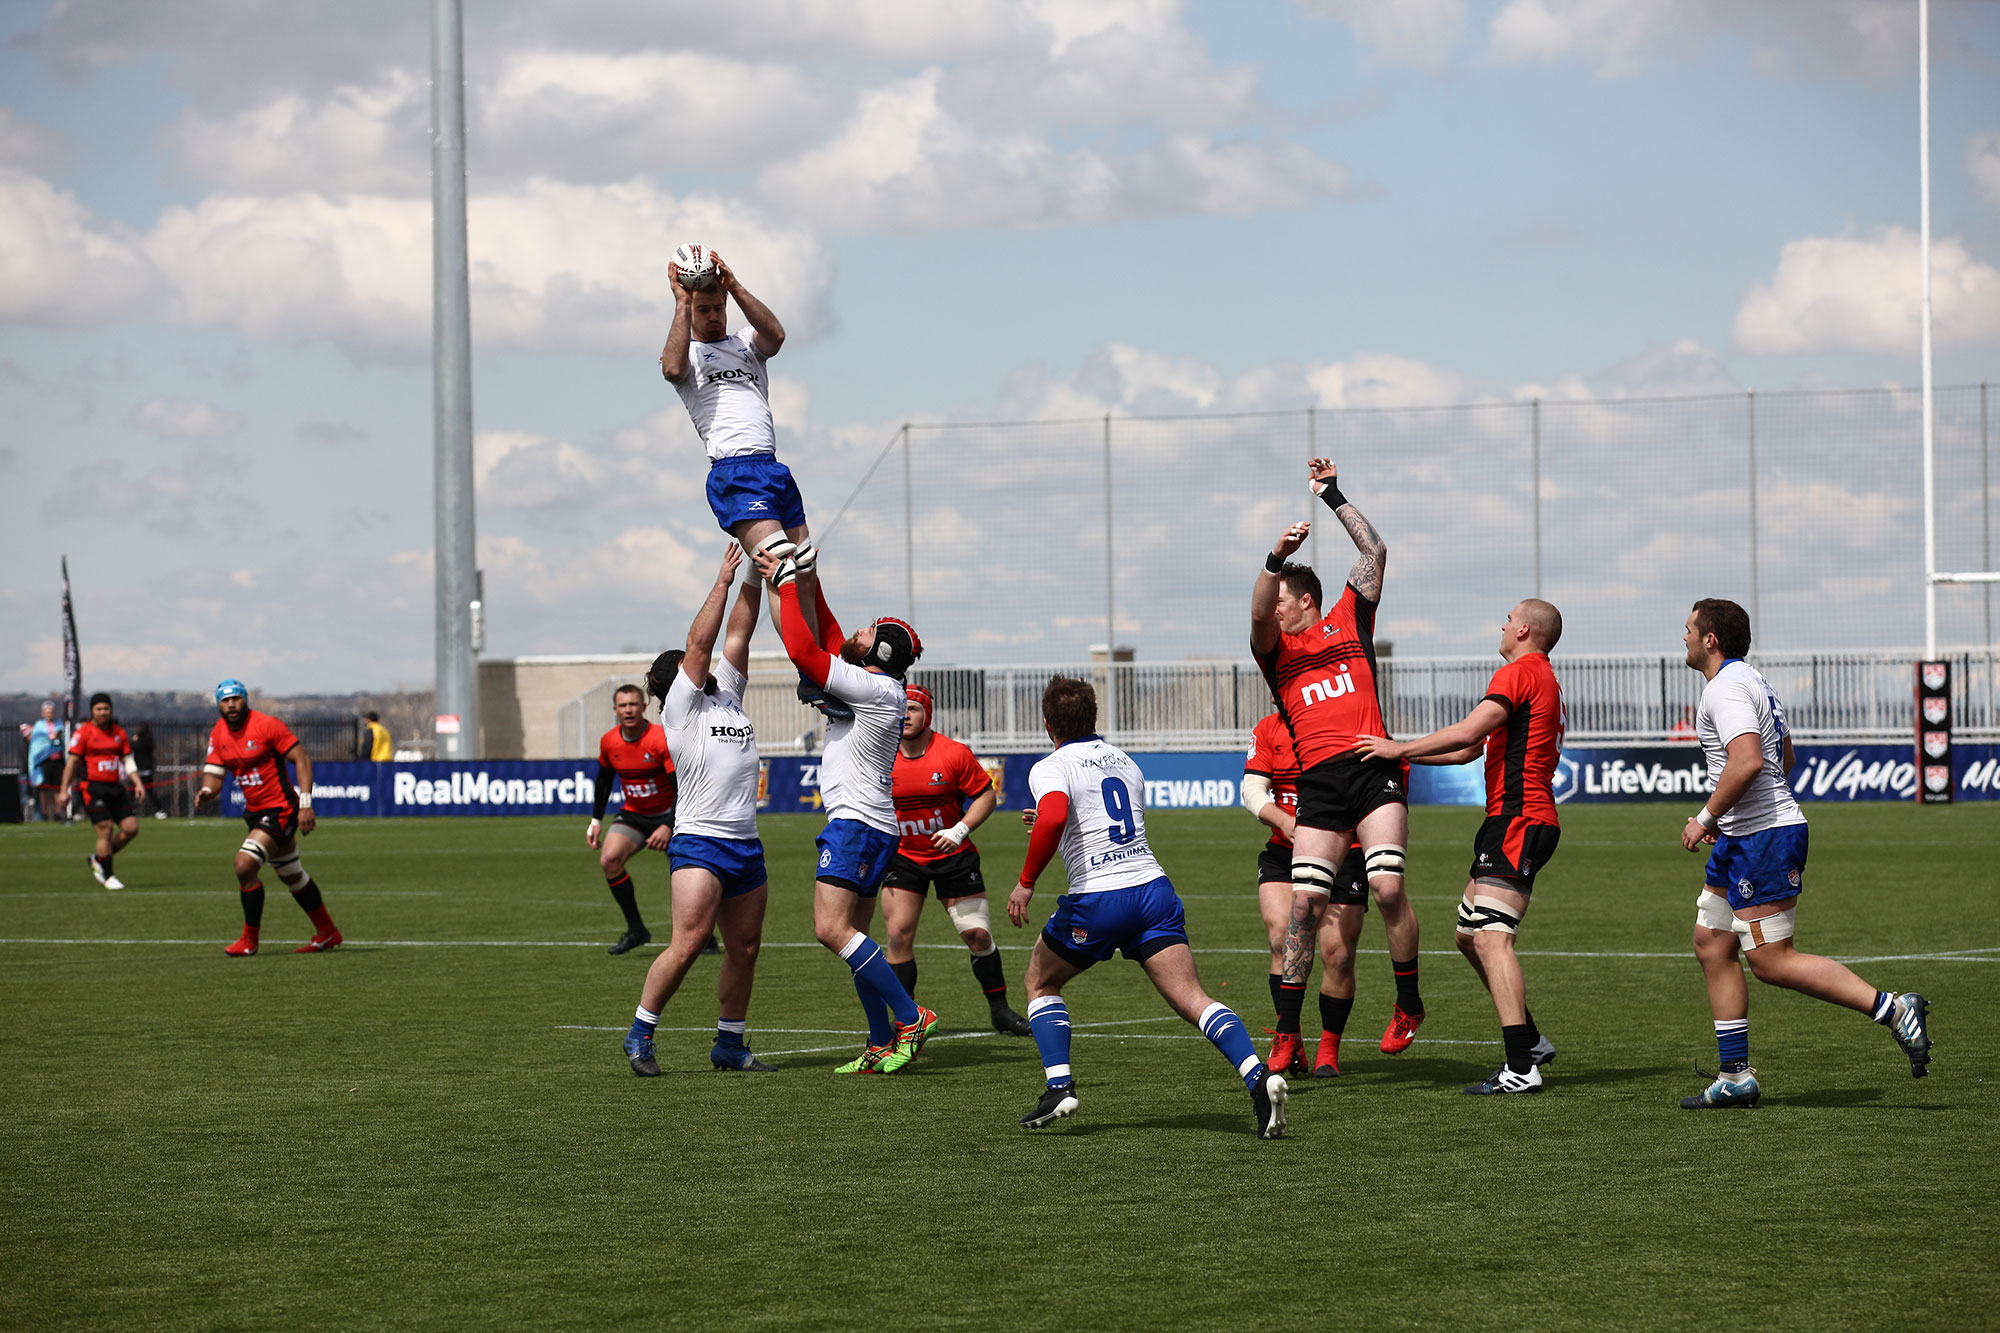 Arrows Use Nine-Try Performance to Earn Record-Breaking Win Over Utah